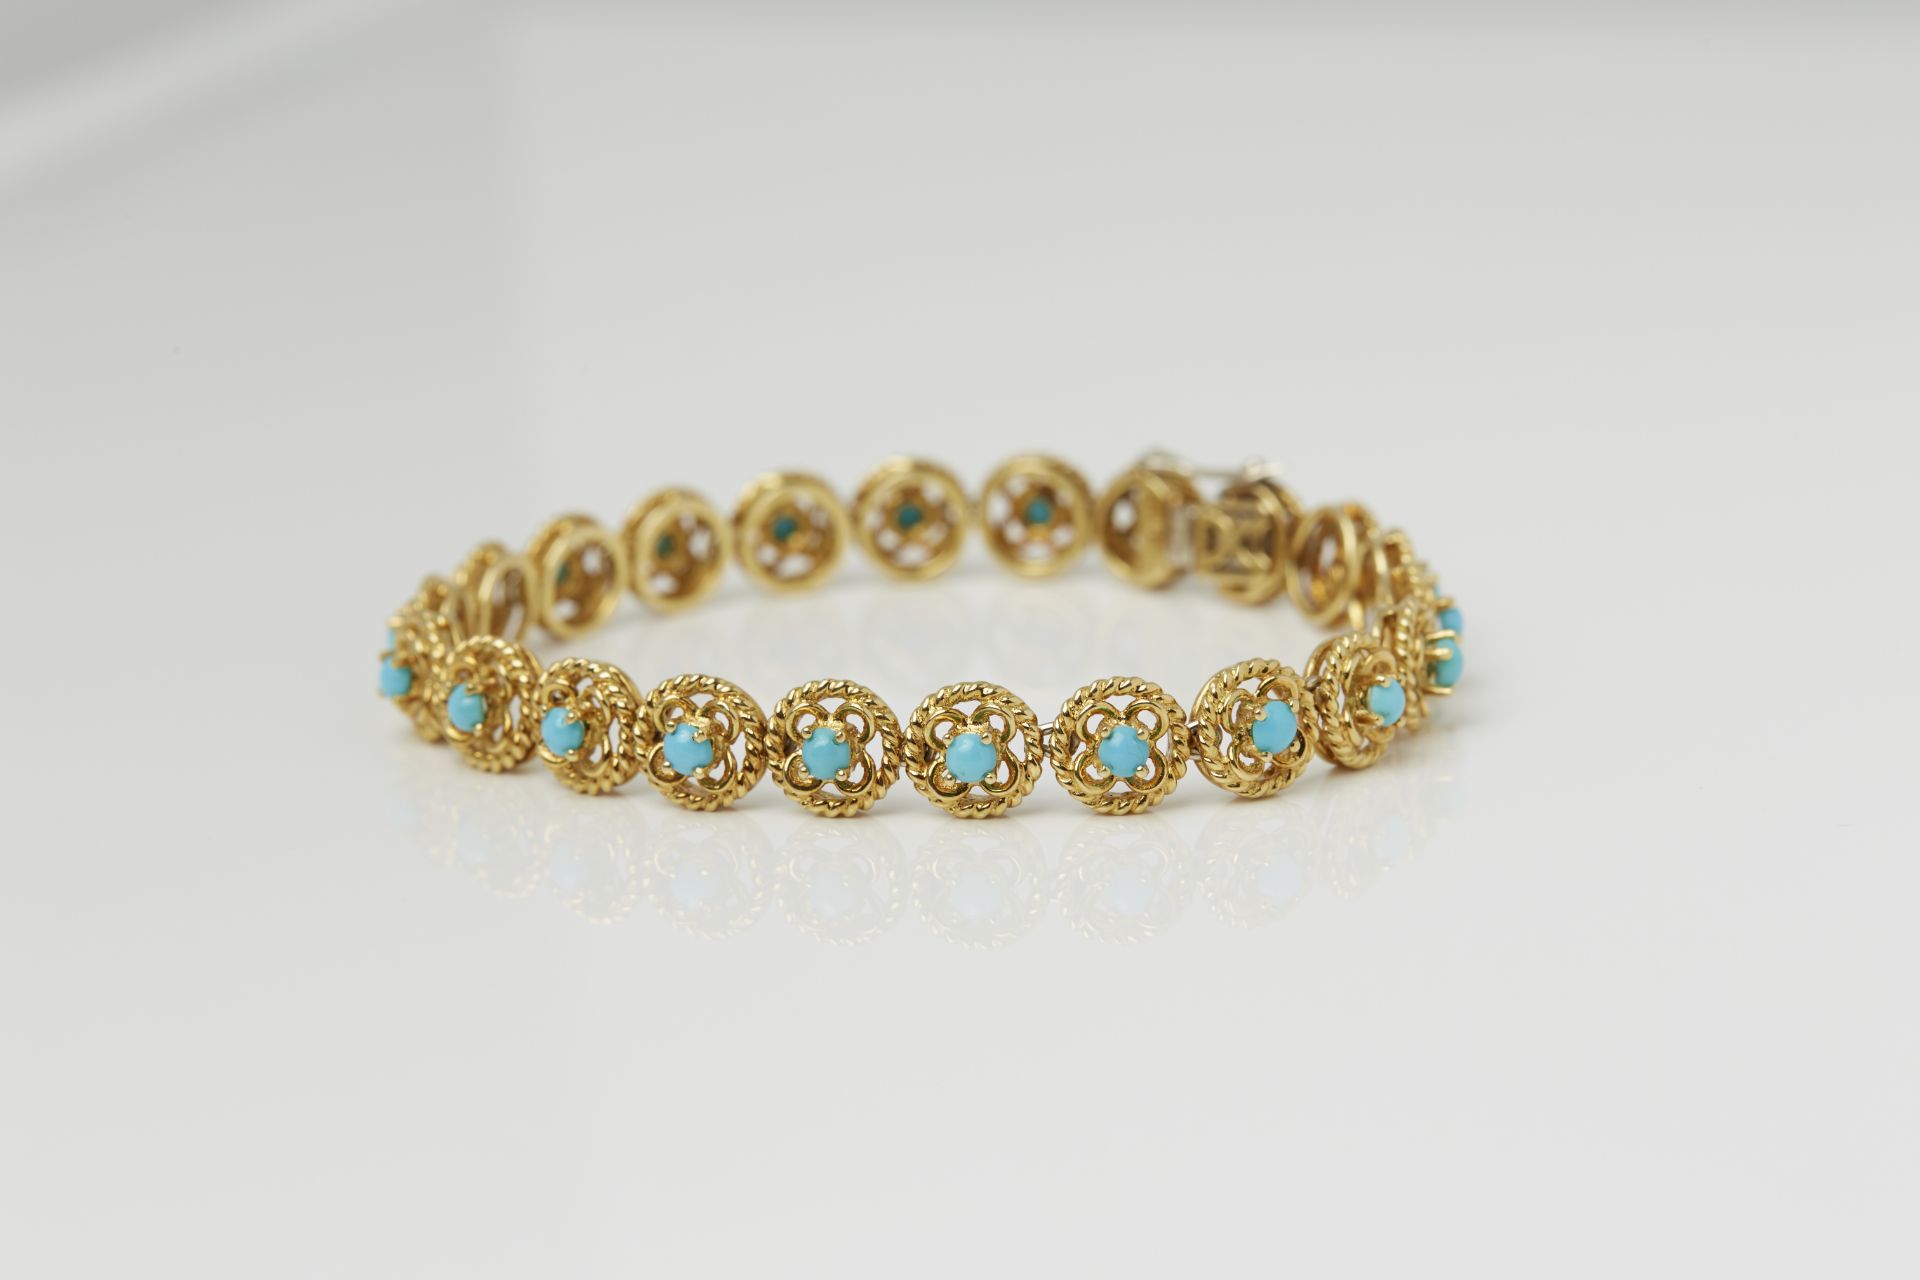 Cartier 18k Yellow Gold Turquoise Bracelet - Image 8 of 12